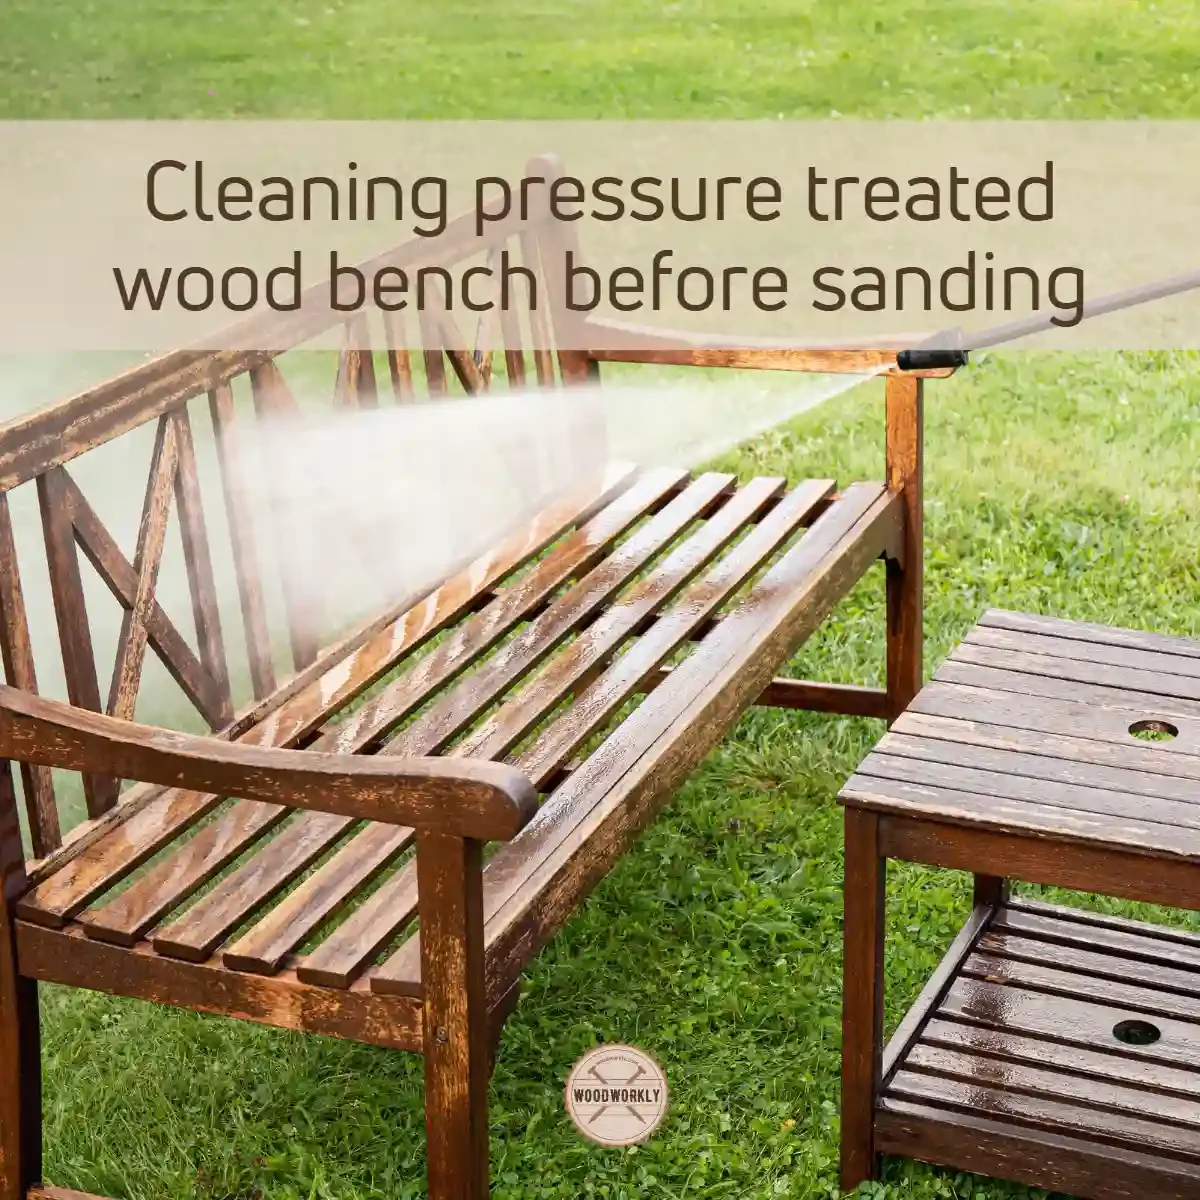 Cleaning pressure treated wood bench before sanding